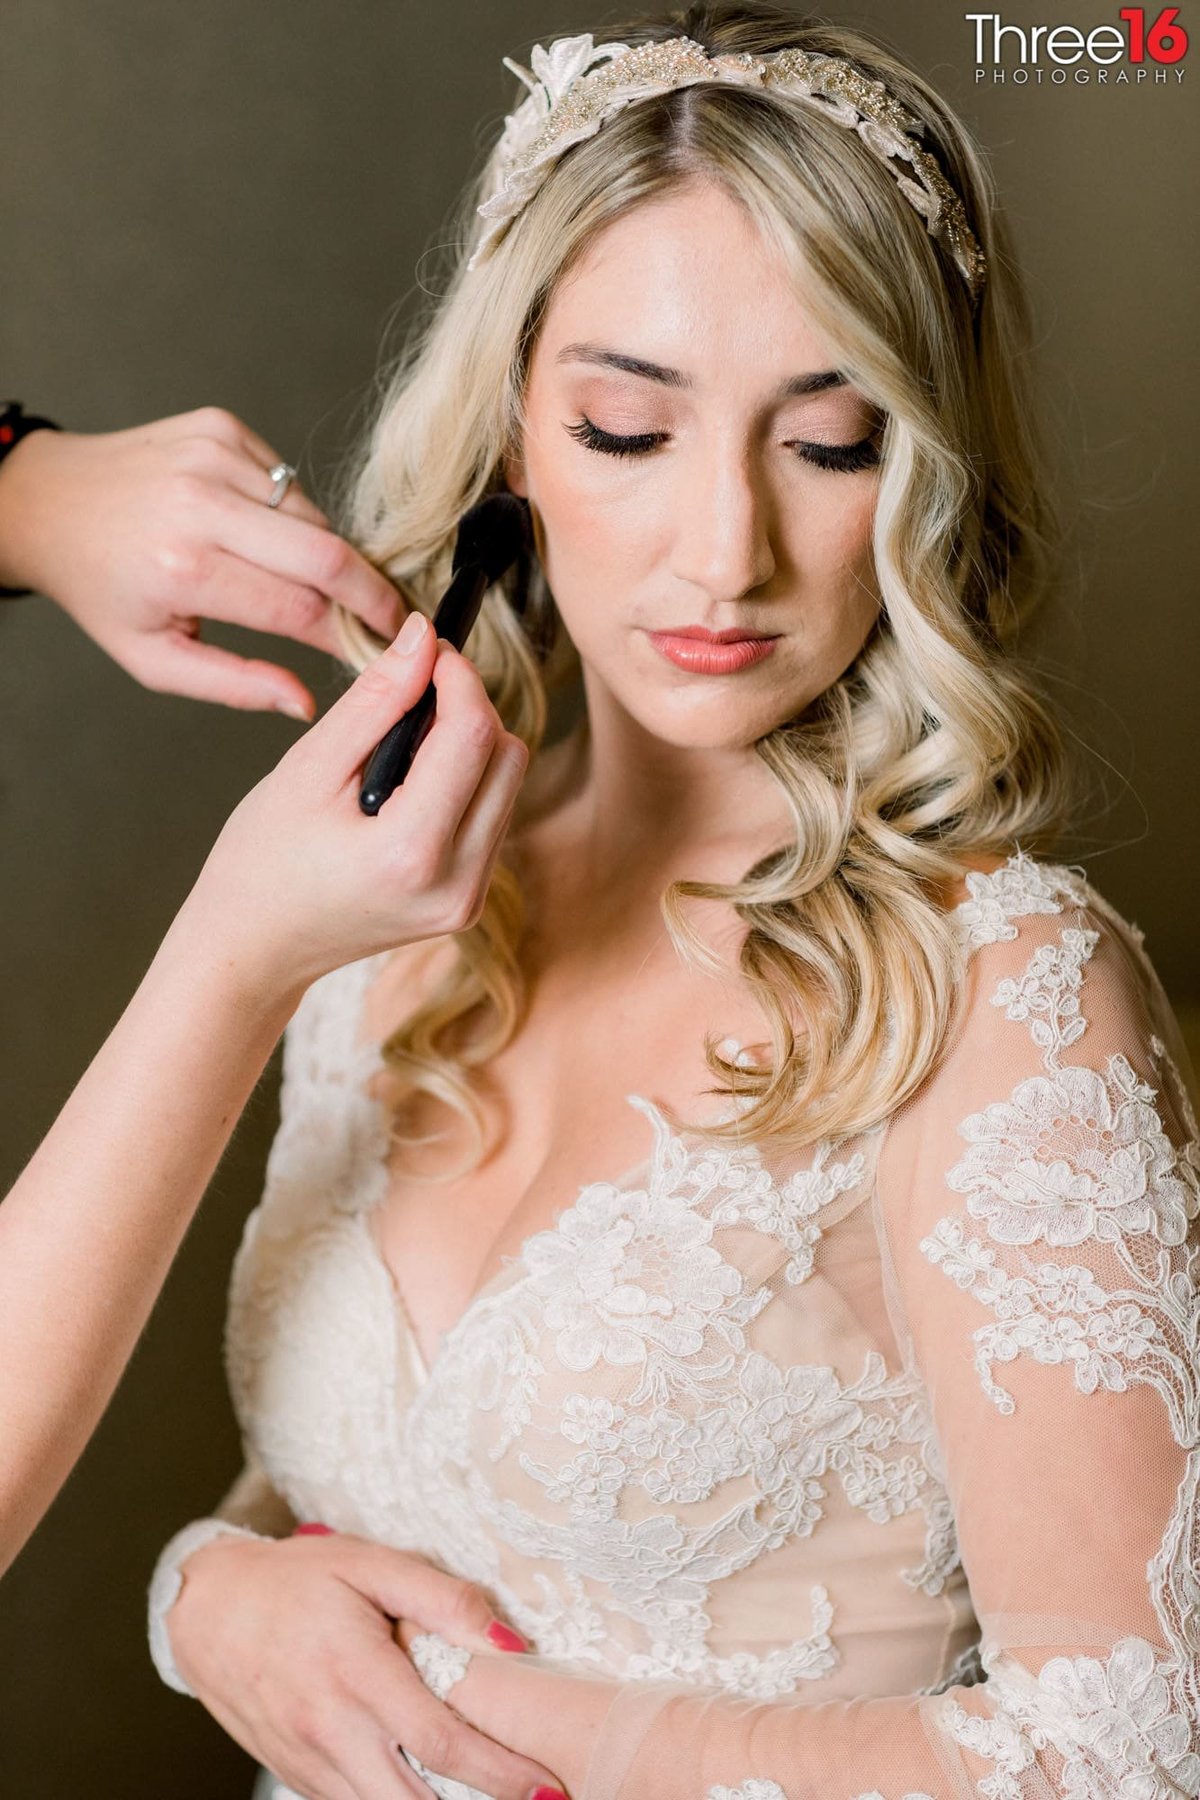 Final touches on the Bride's hair prior to the wedding ceremony